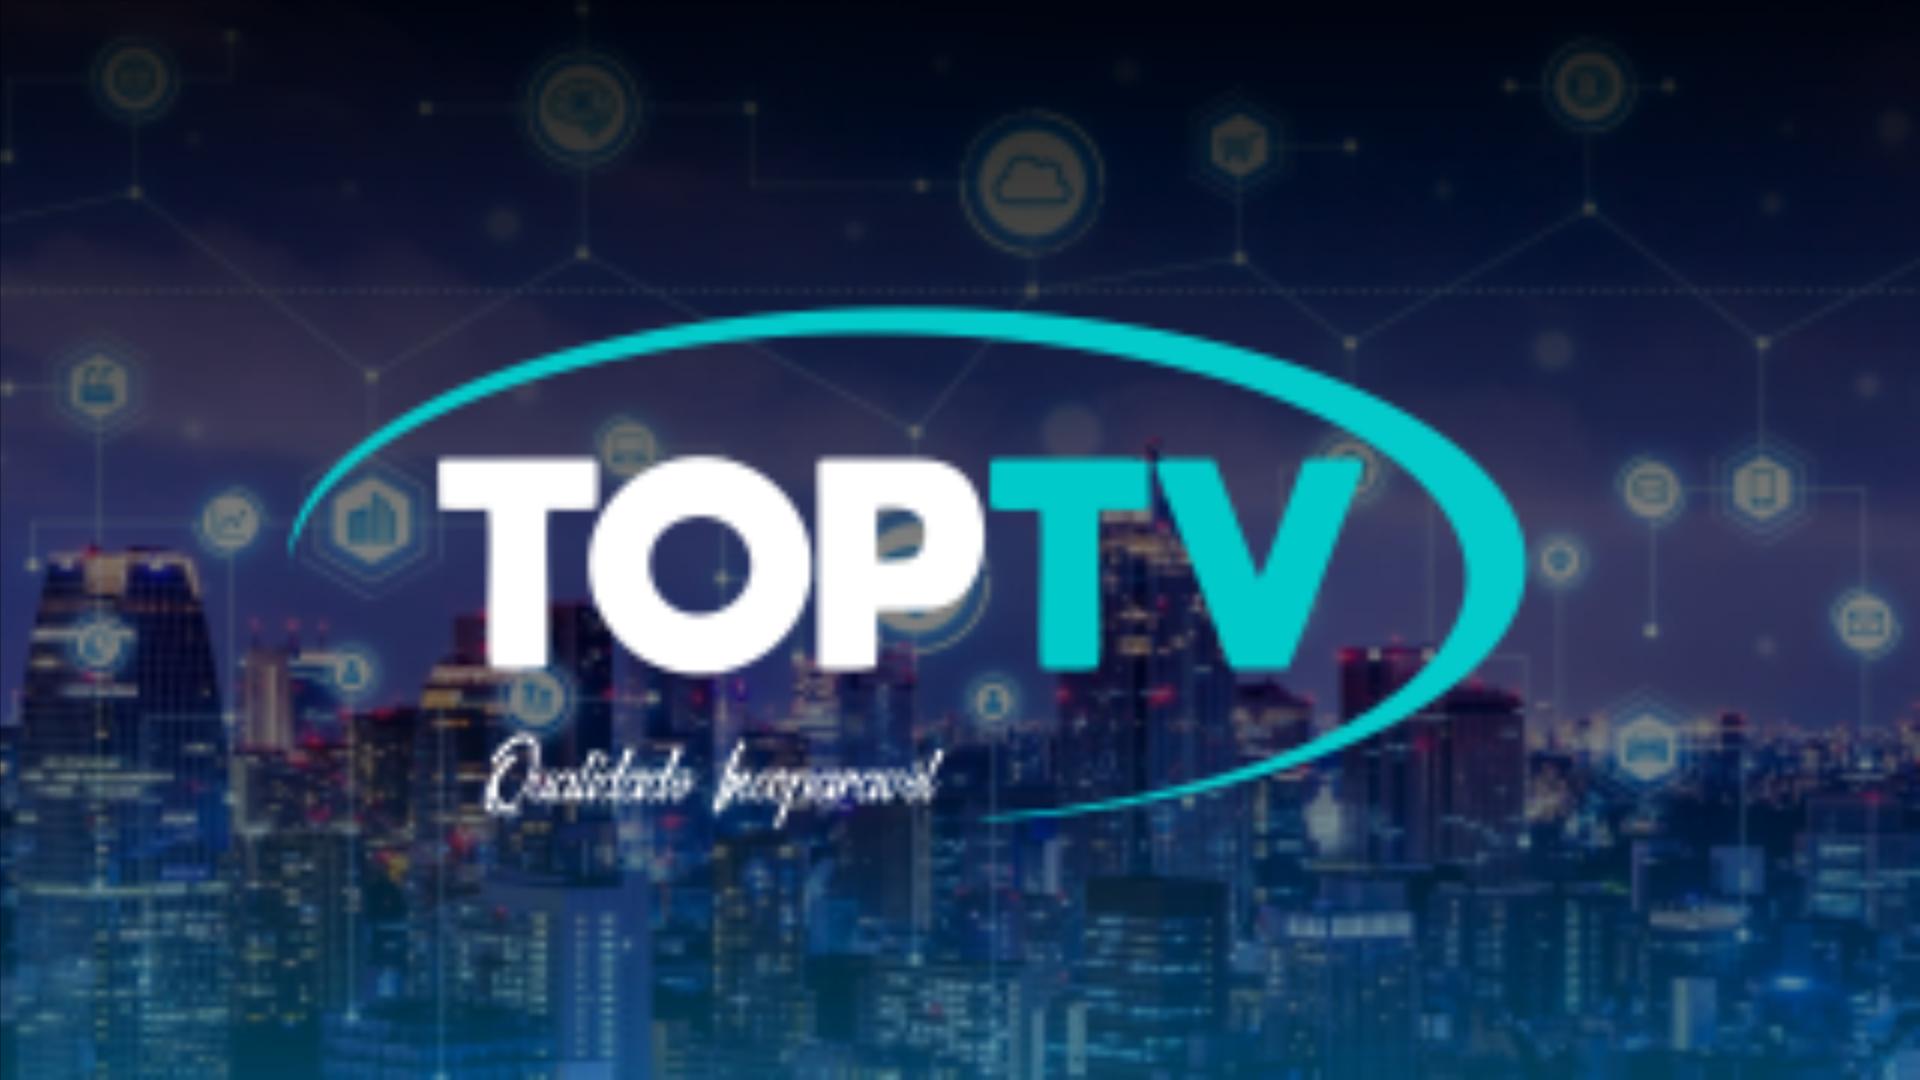 TOP TV for Android - APK Download